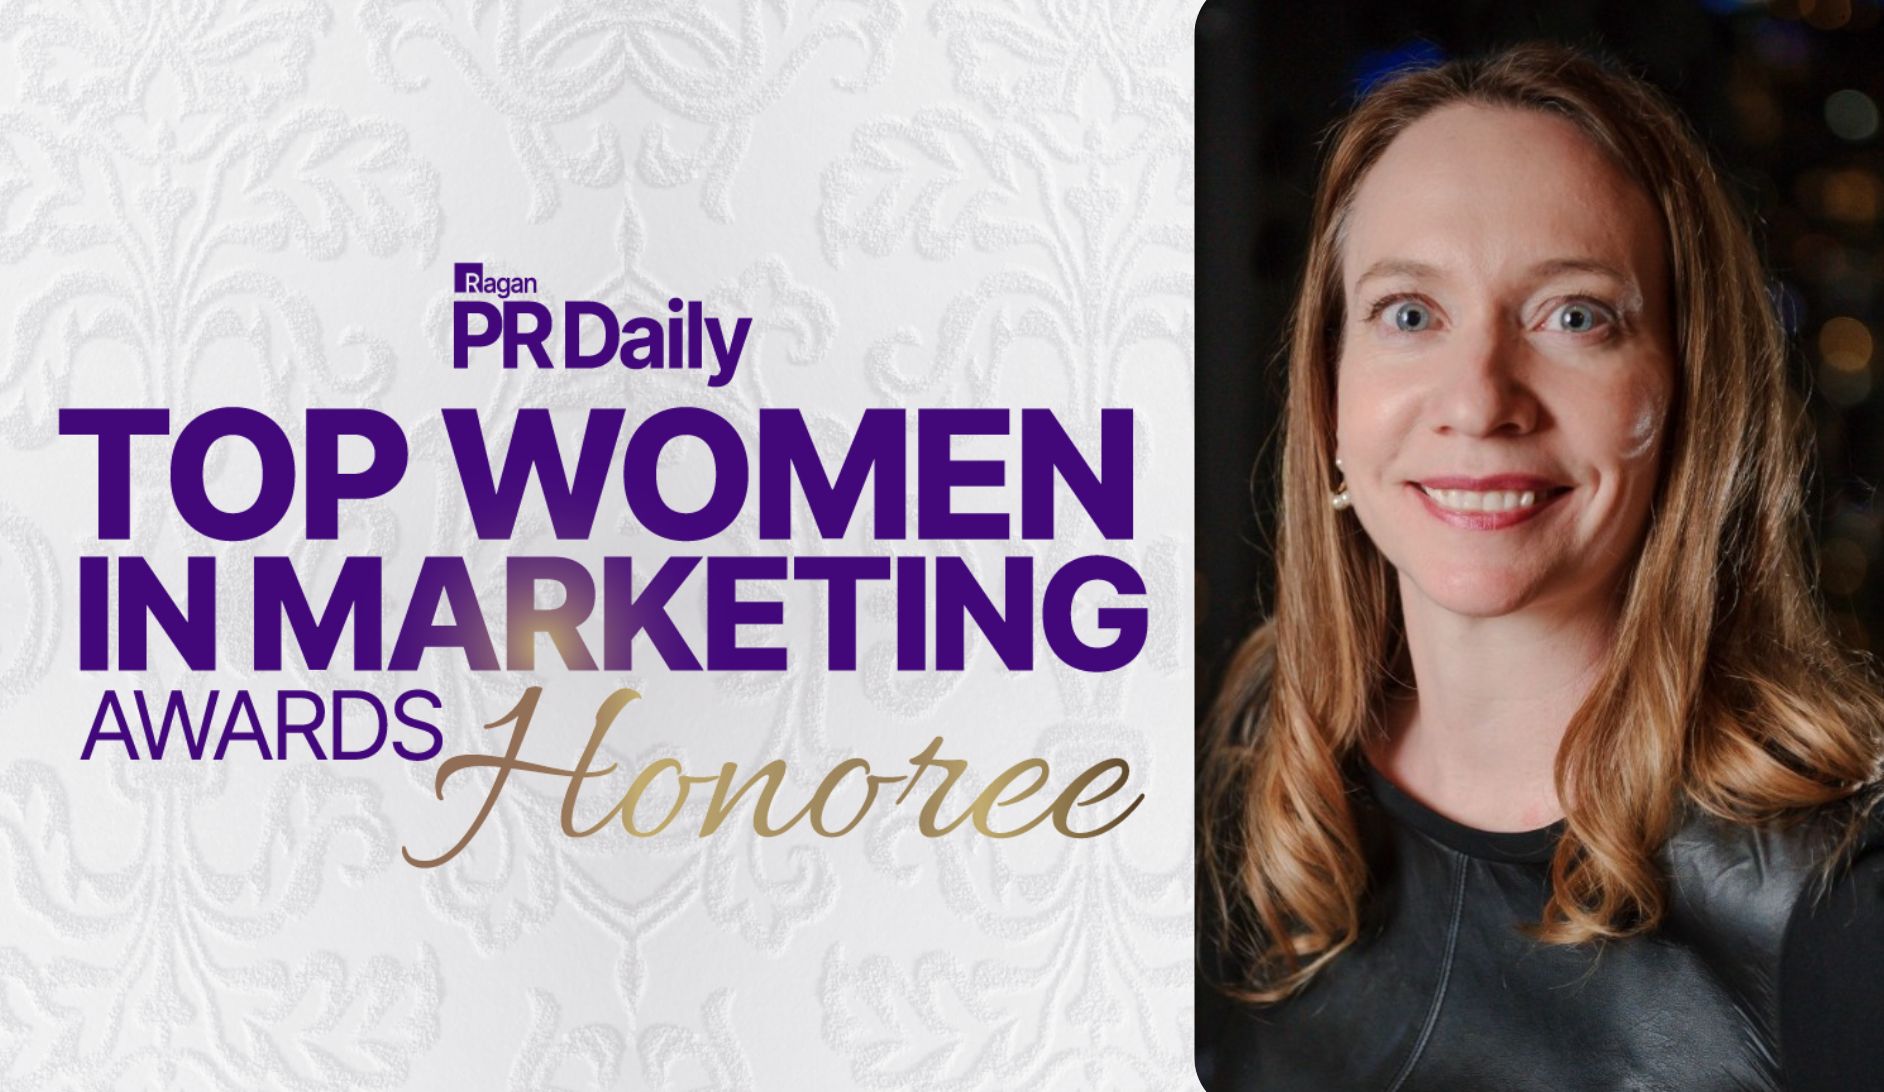 PR Daily Top Women in Marketing Awards Honoree